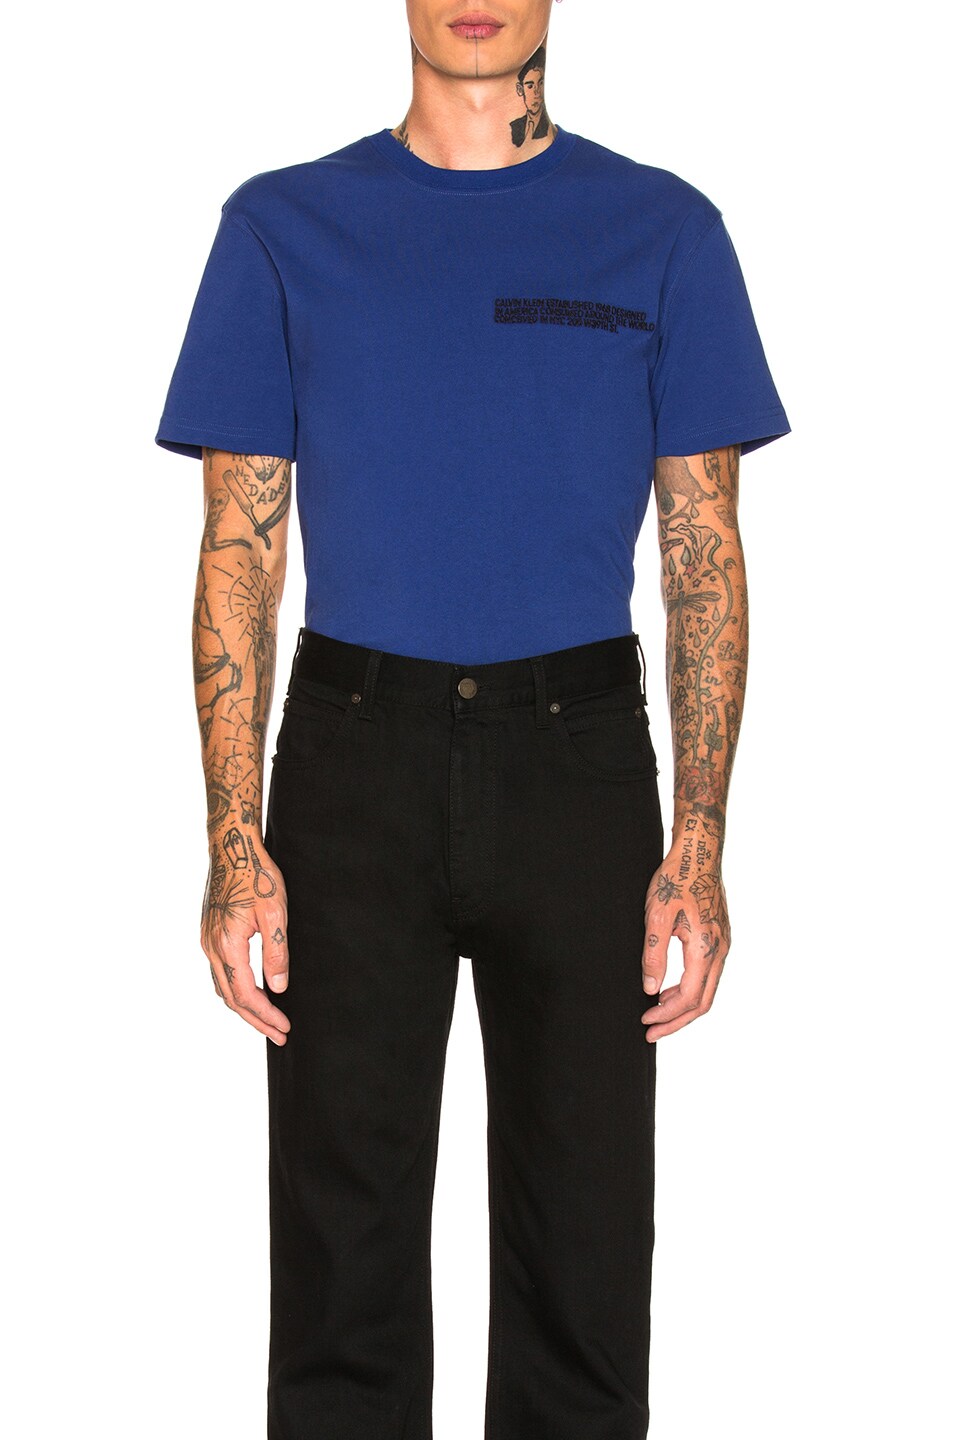 Image 1 of CALVIN KLEIN 205W39NYC Embroidered Tee in Royal Blue